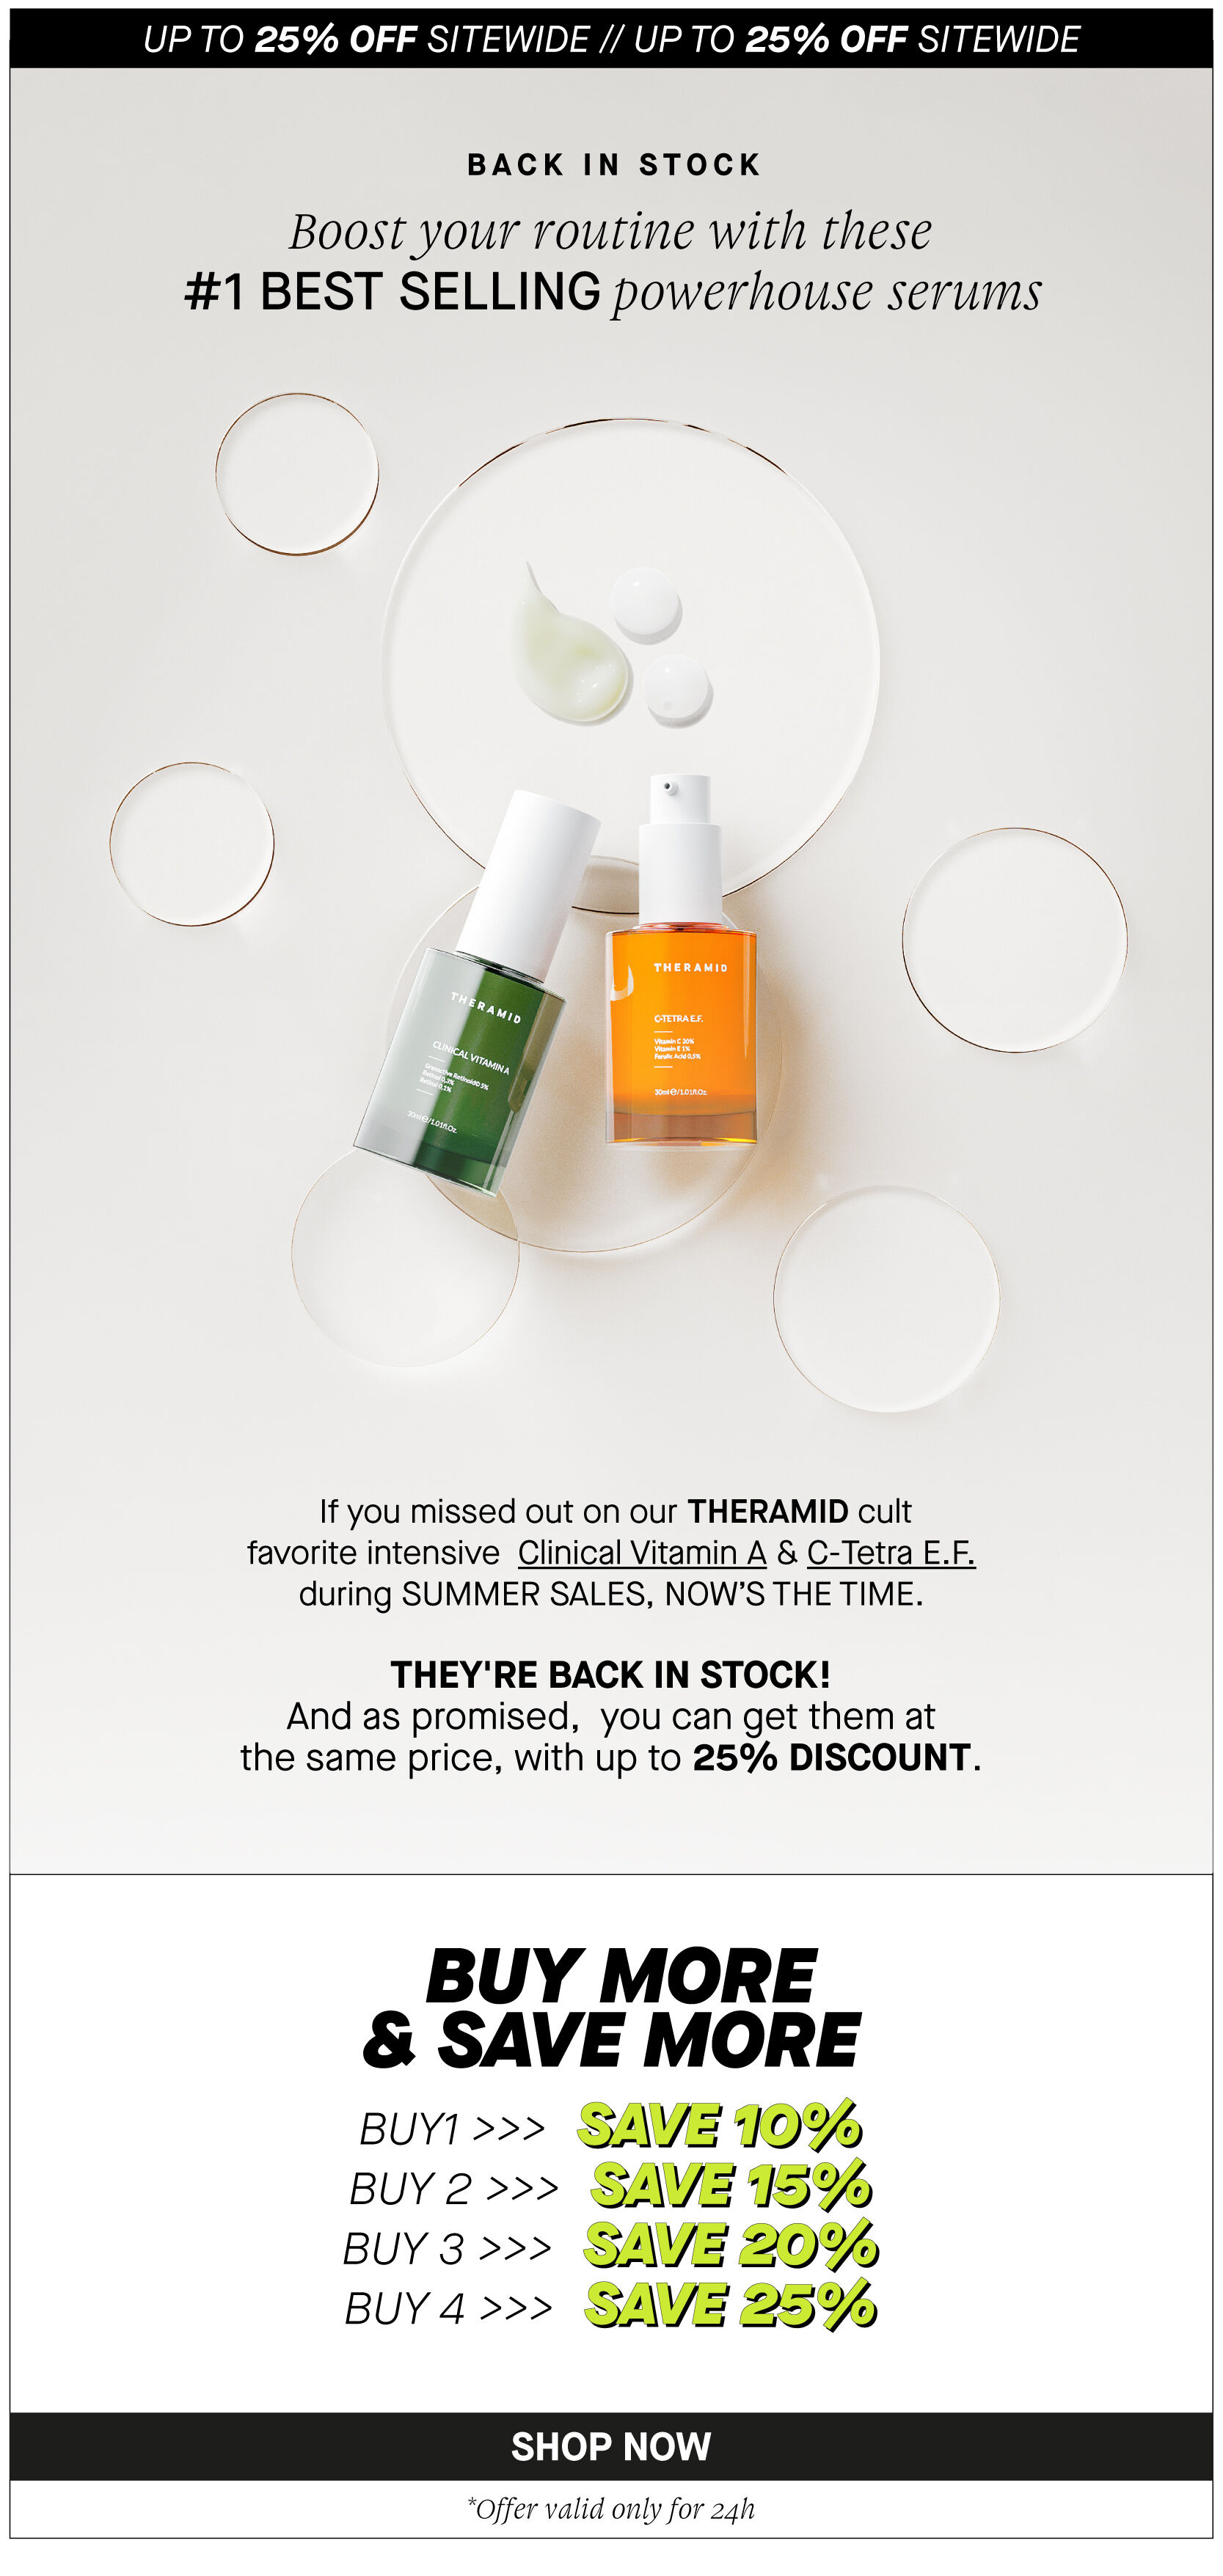 UP TO 25% OFF SITEWIDE UP TO 25% OFF SITEWIDE BACK IN STOCK Boost your routine with these #1 BEST SELLING powerhouse serums If you missed out on our THERAMID cult favorite intensive Clinical Vitamin A C-Tetra E.F. during SUMMER SALES, NOWS THE TIME. THEY'RE BACK IN STOCK! And as promised, you can get them at the same price, with up to 25% DISCOUNT. BUY MORE SAVE MORE BUYT SAVE10% BUY 2 SAVE 15% BUY 3 SAVE 20% BUY 4 SAVIE 25% *Offer valid only for 24h 